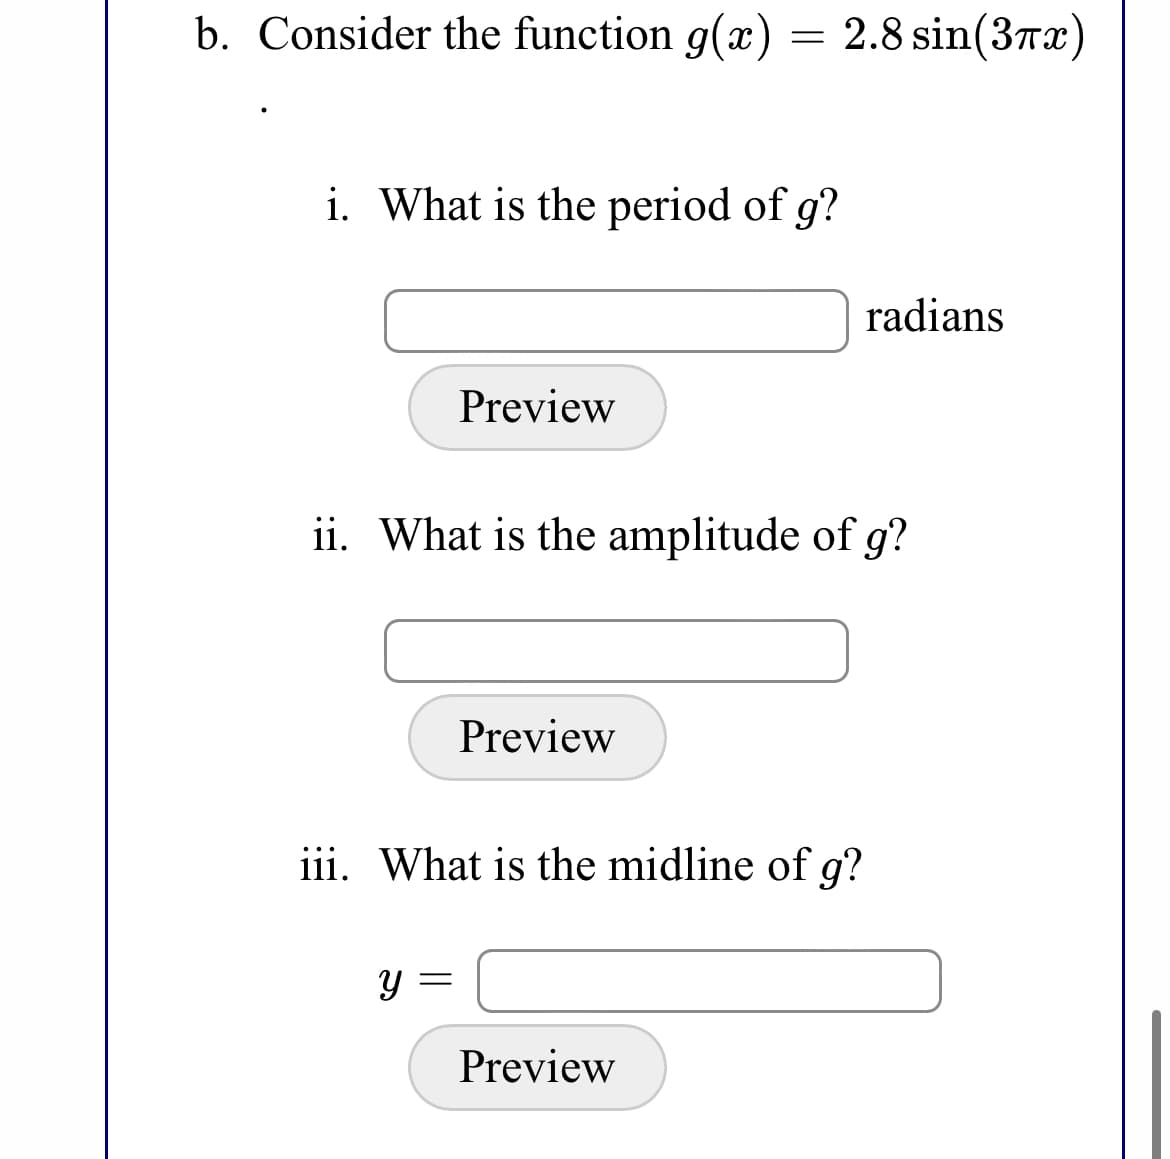 b. Consider the function g(x) = 2.8 sin(37x)
i. What is the period of g?
radians
Preview
ii. What is the amplitude of g?
Preview
iii. What is the midline of g?
Preview
